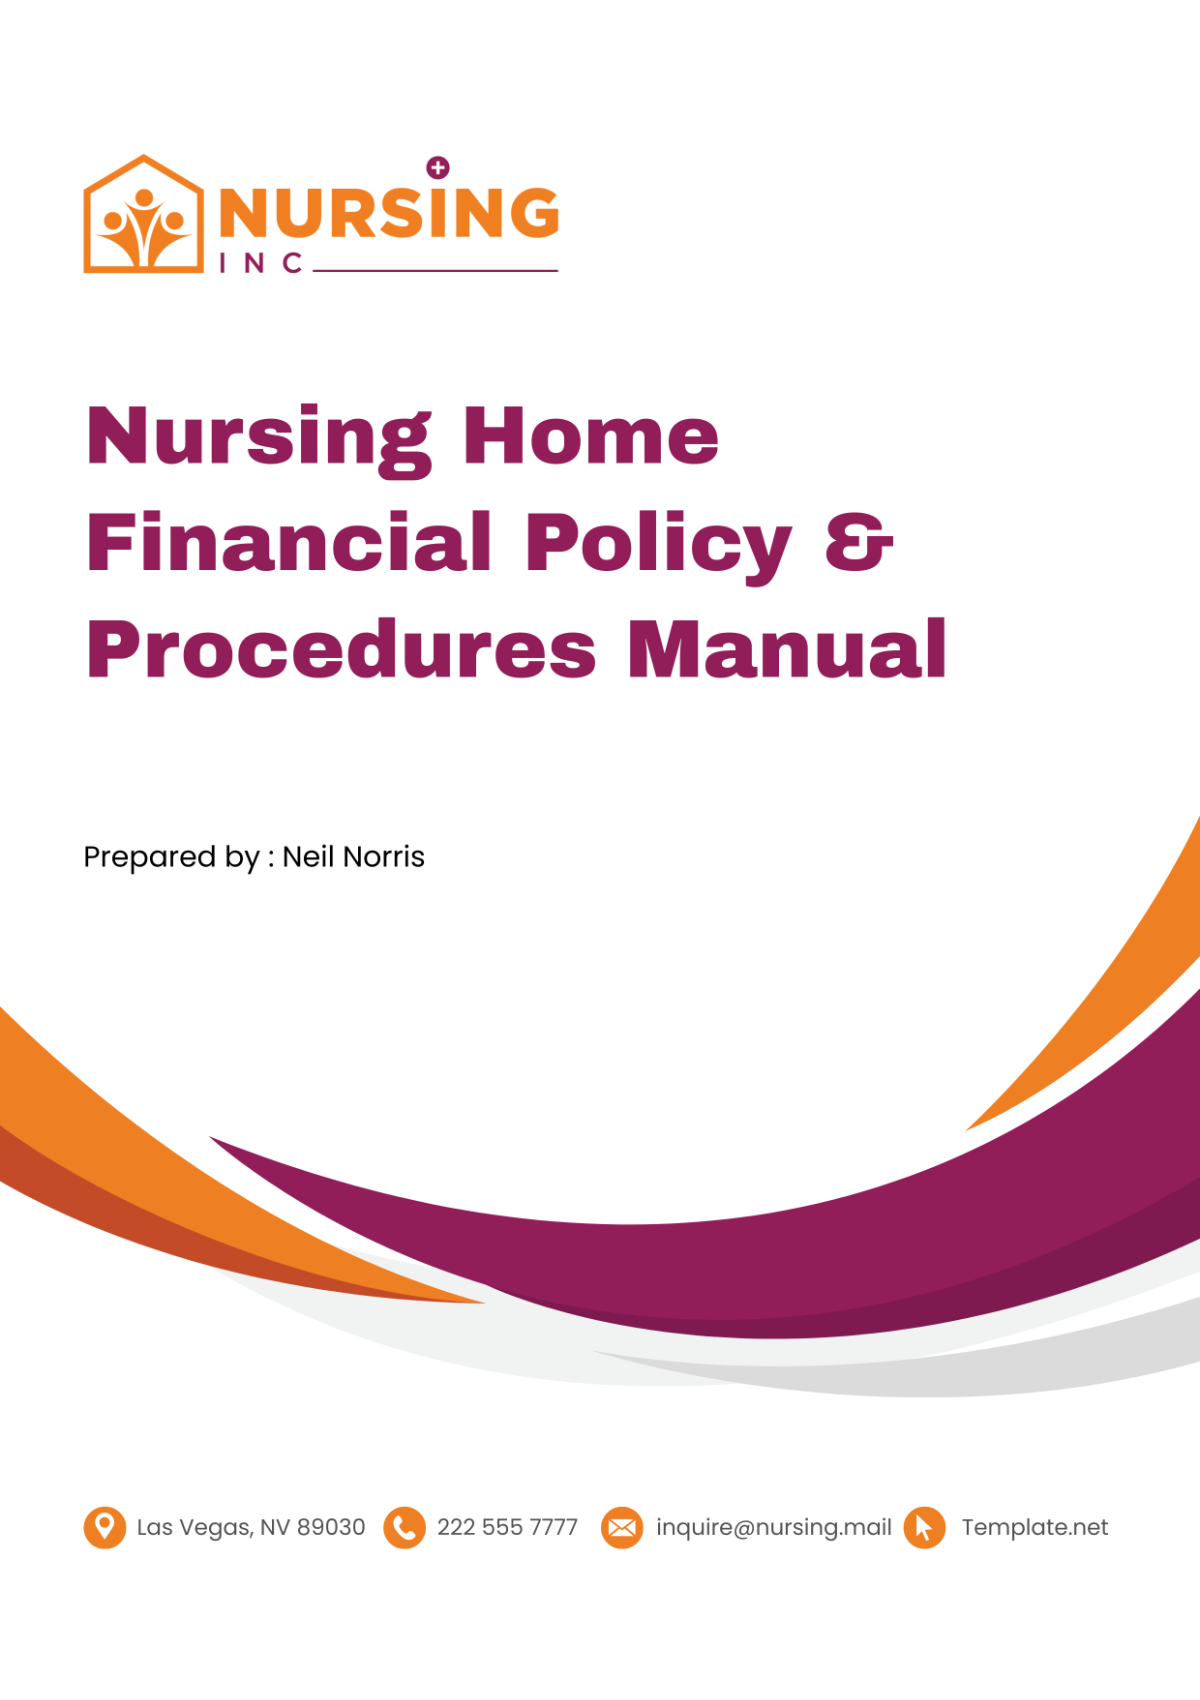 Nursing Home Financial Policy & Procedures Manual Template